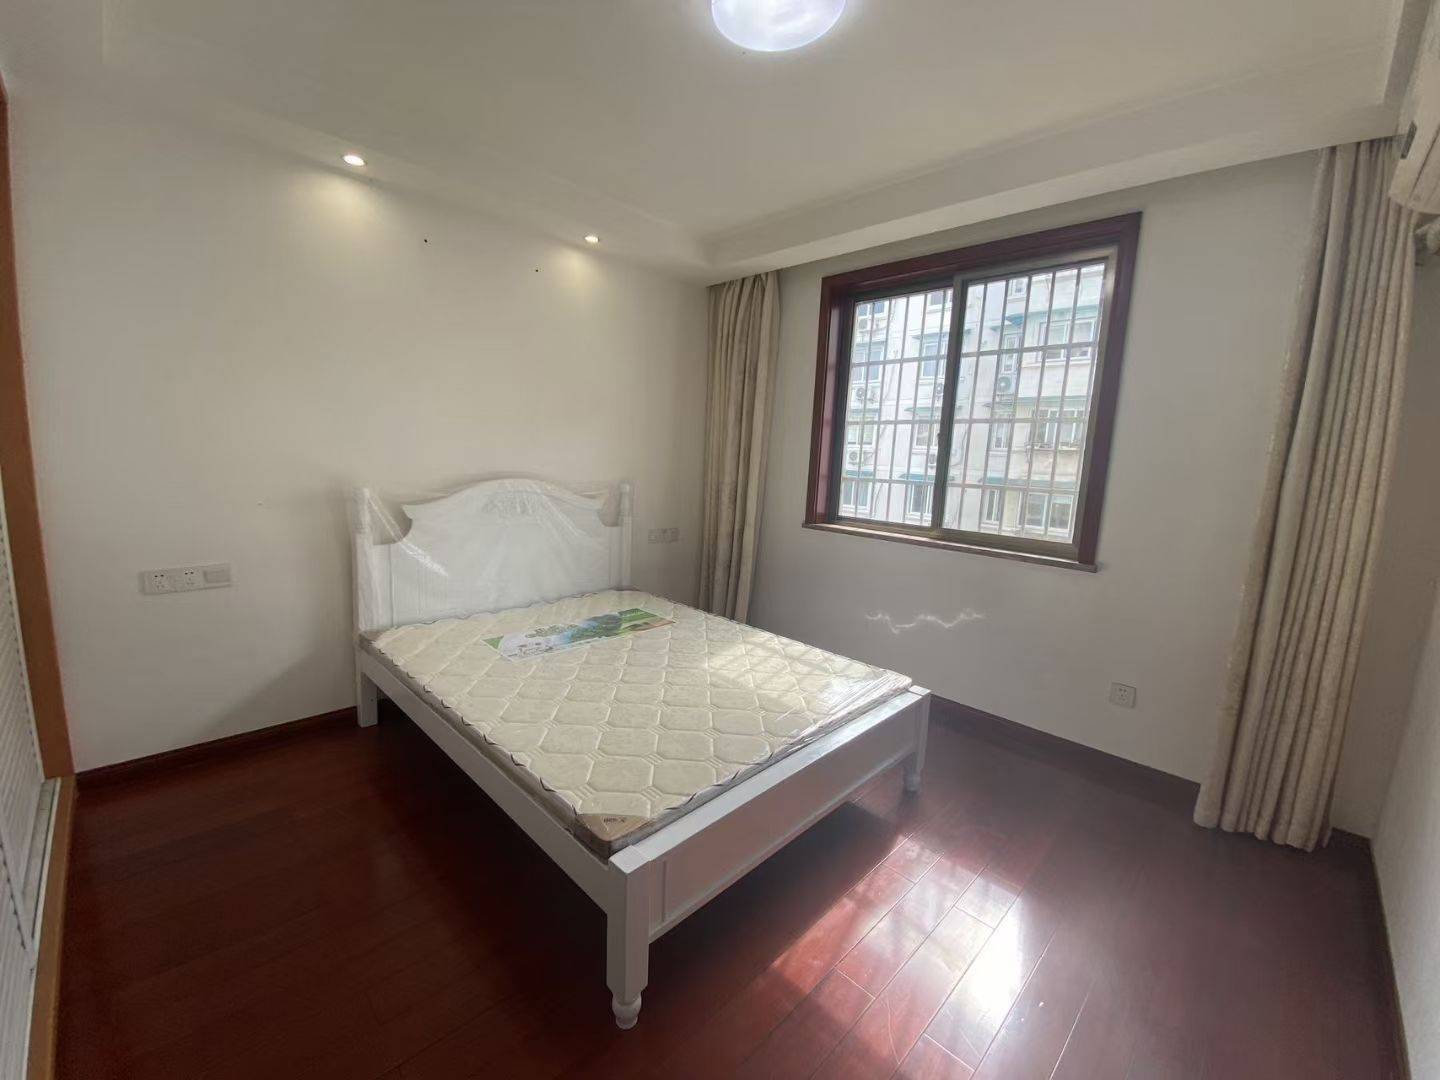 Ningbo-Haishu-Cozy Home,Clean&Comfy,No Gender Limit,Chilled,Pet Friendly